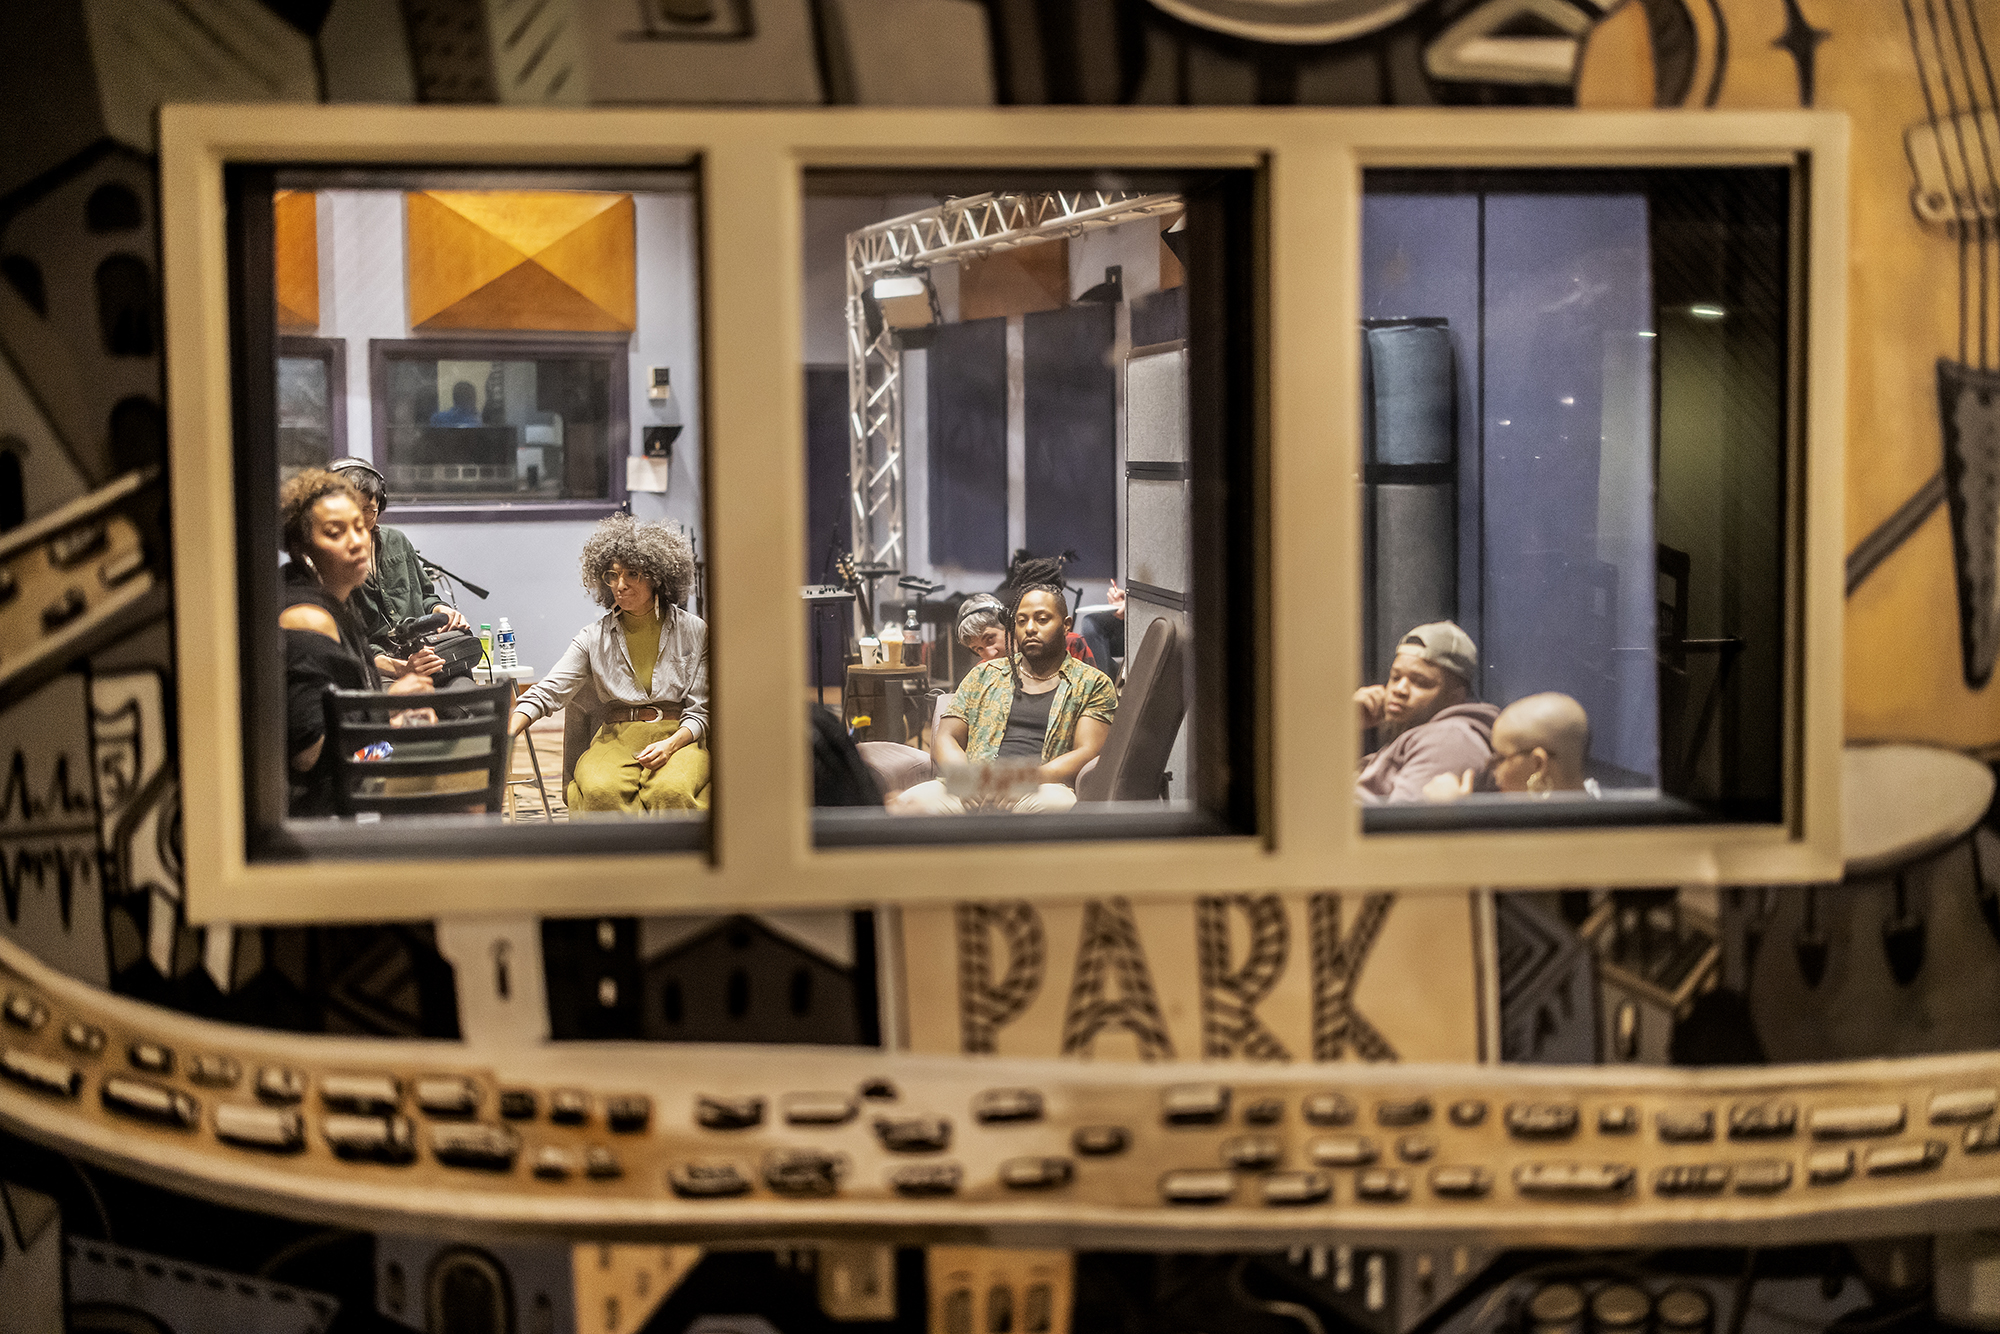 Members of a band seen through a window in WXPN’s recording studio.